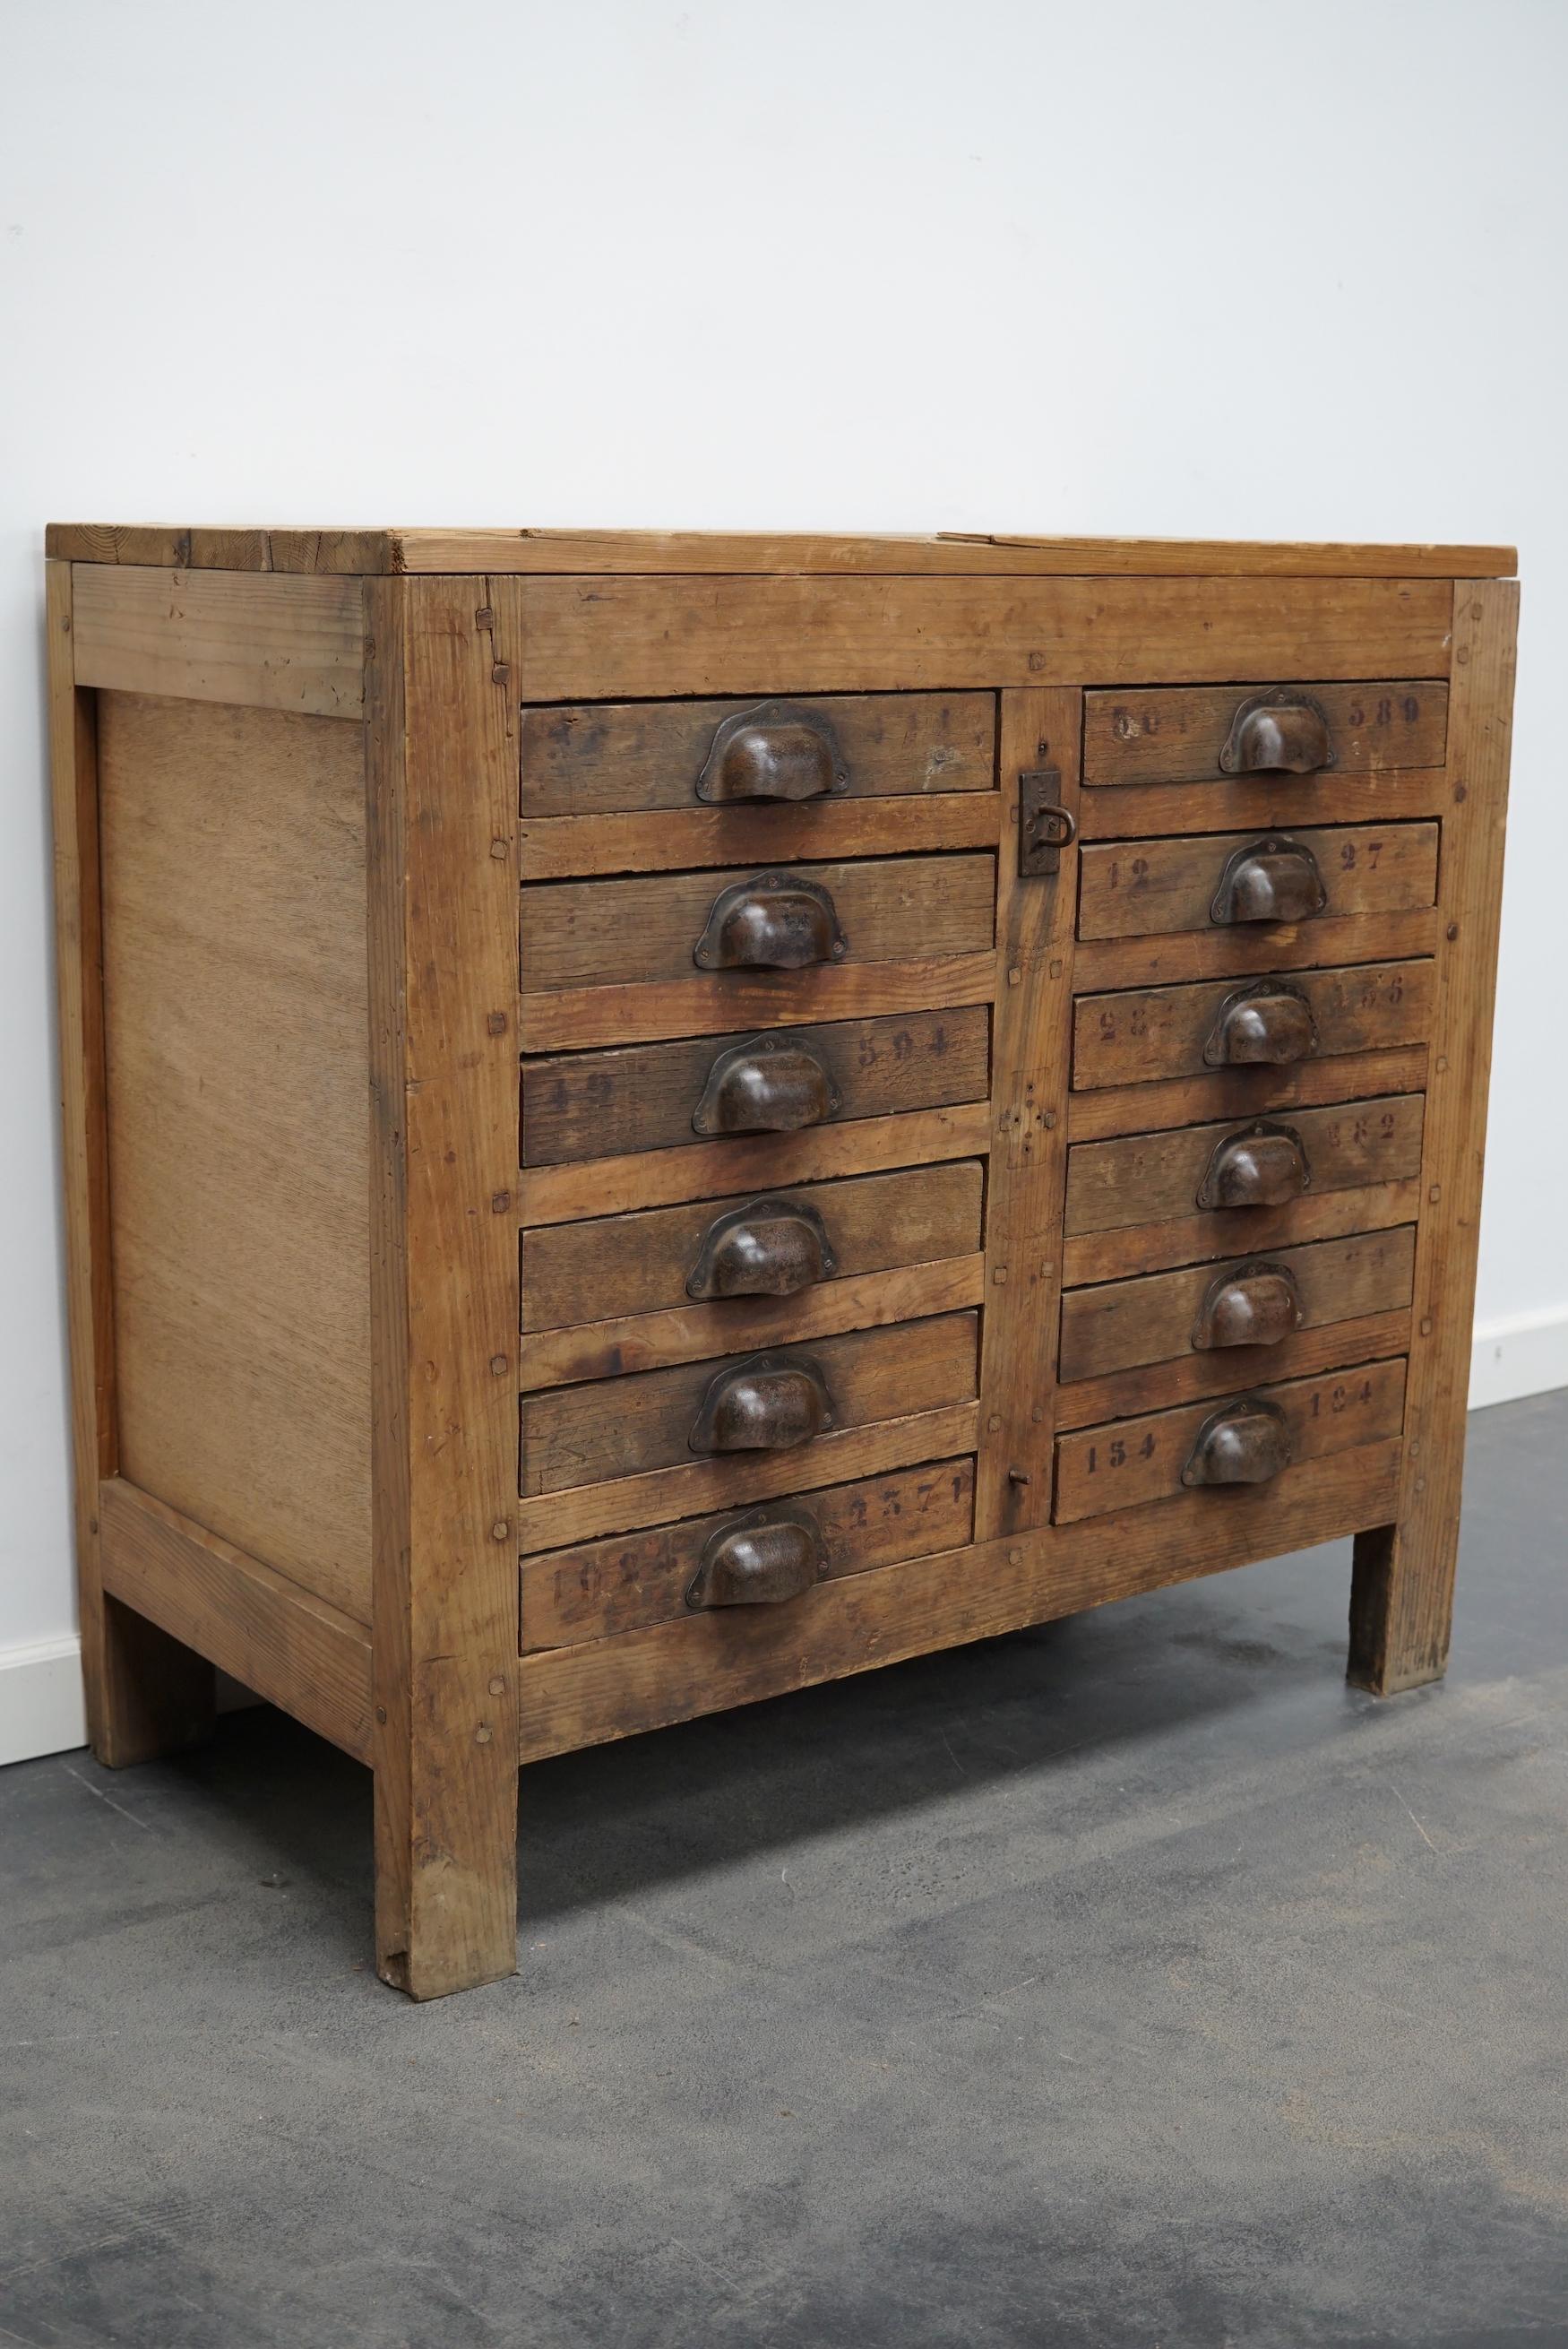 Mid-20th Century French Pine Rustic Apothecary Workshop Cabinet, circa 1950s